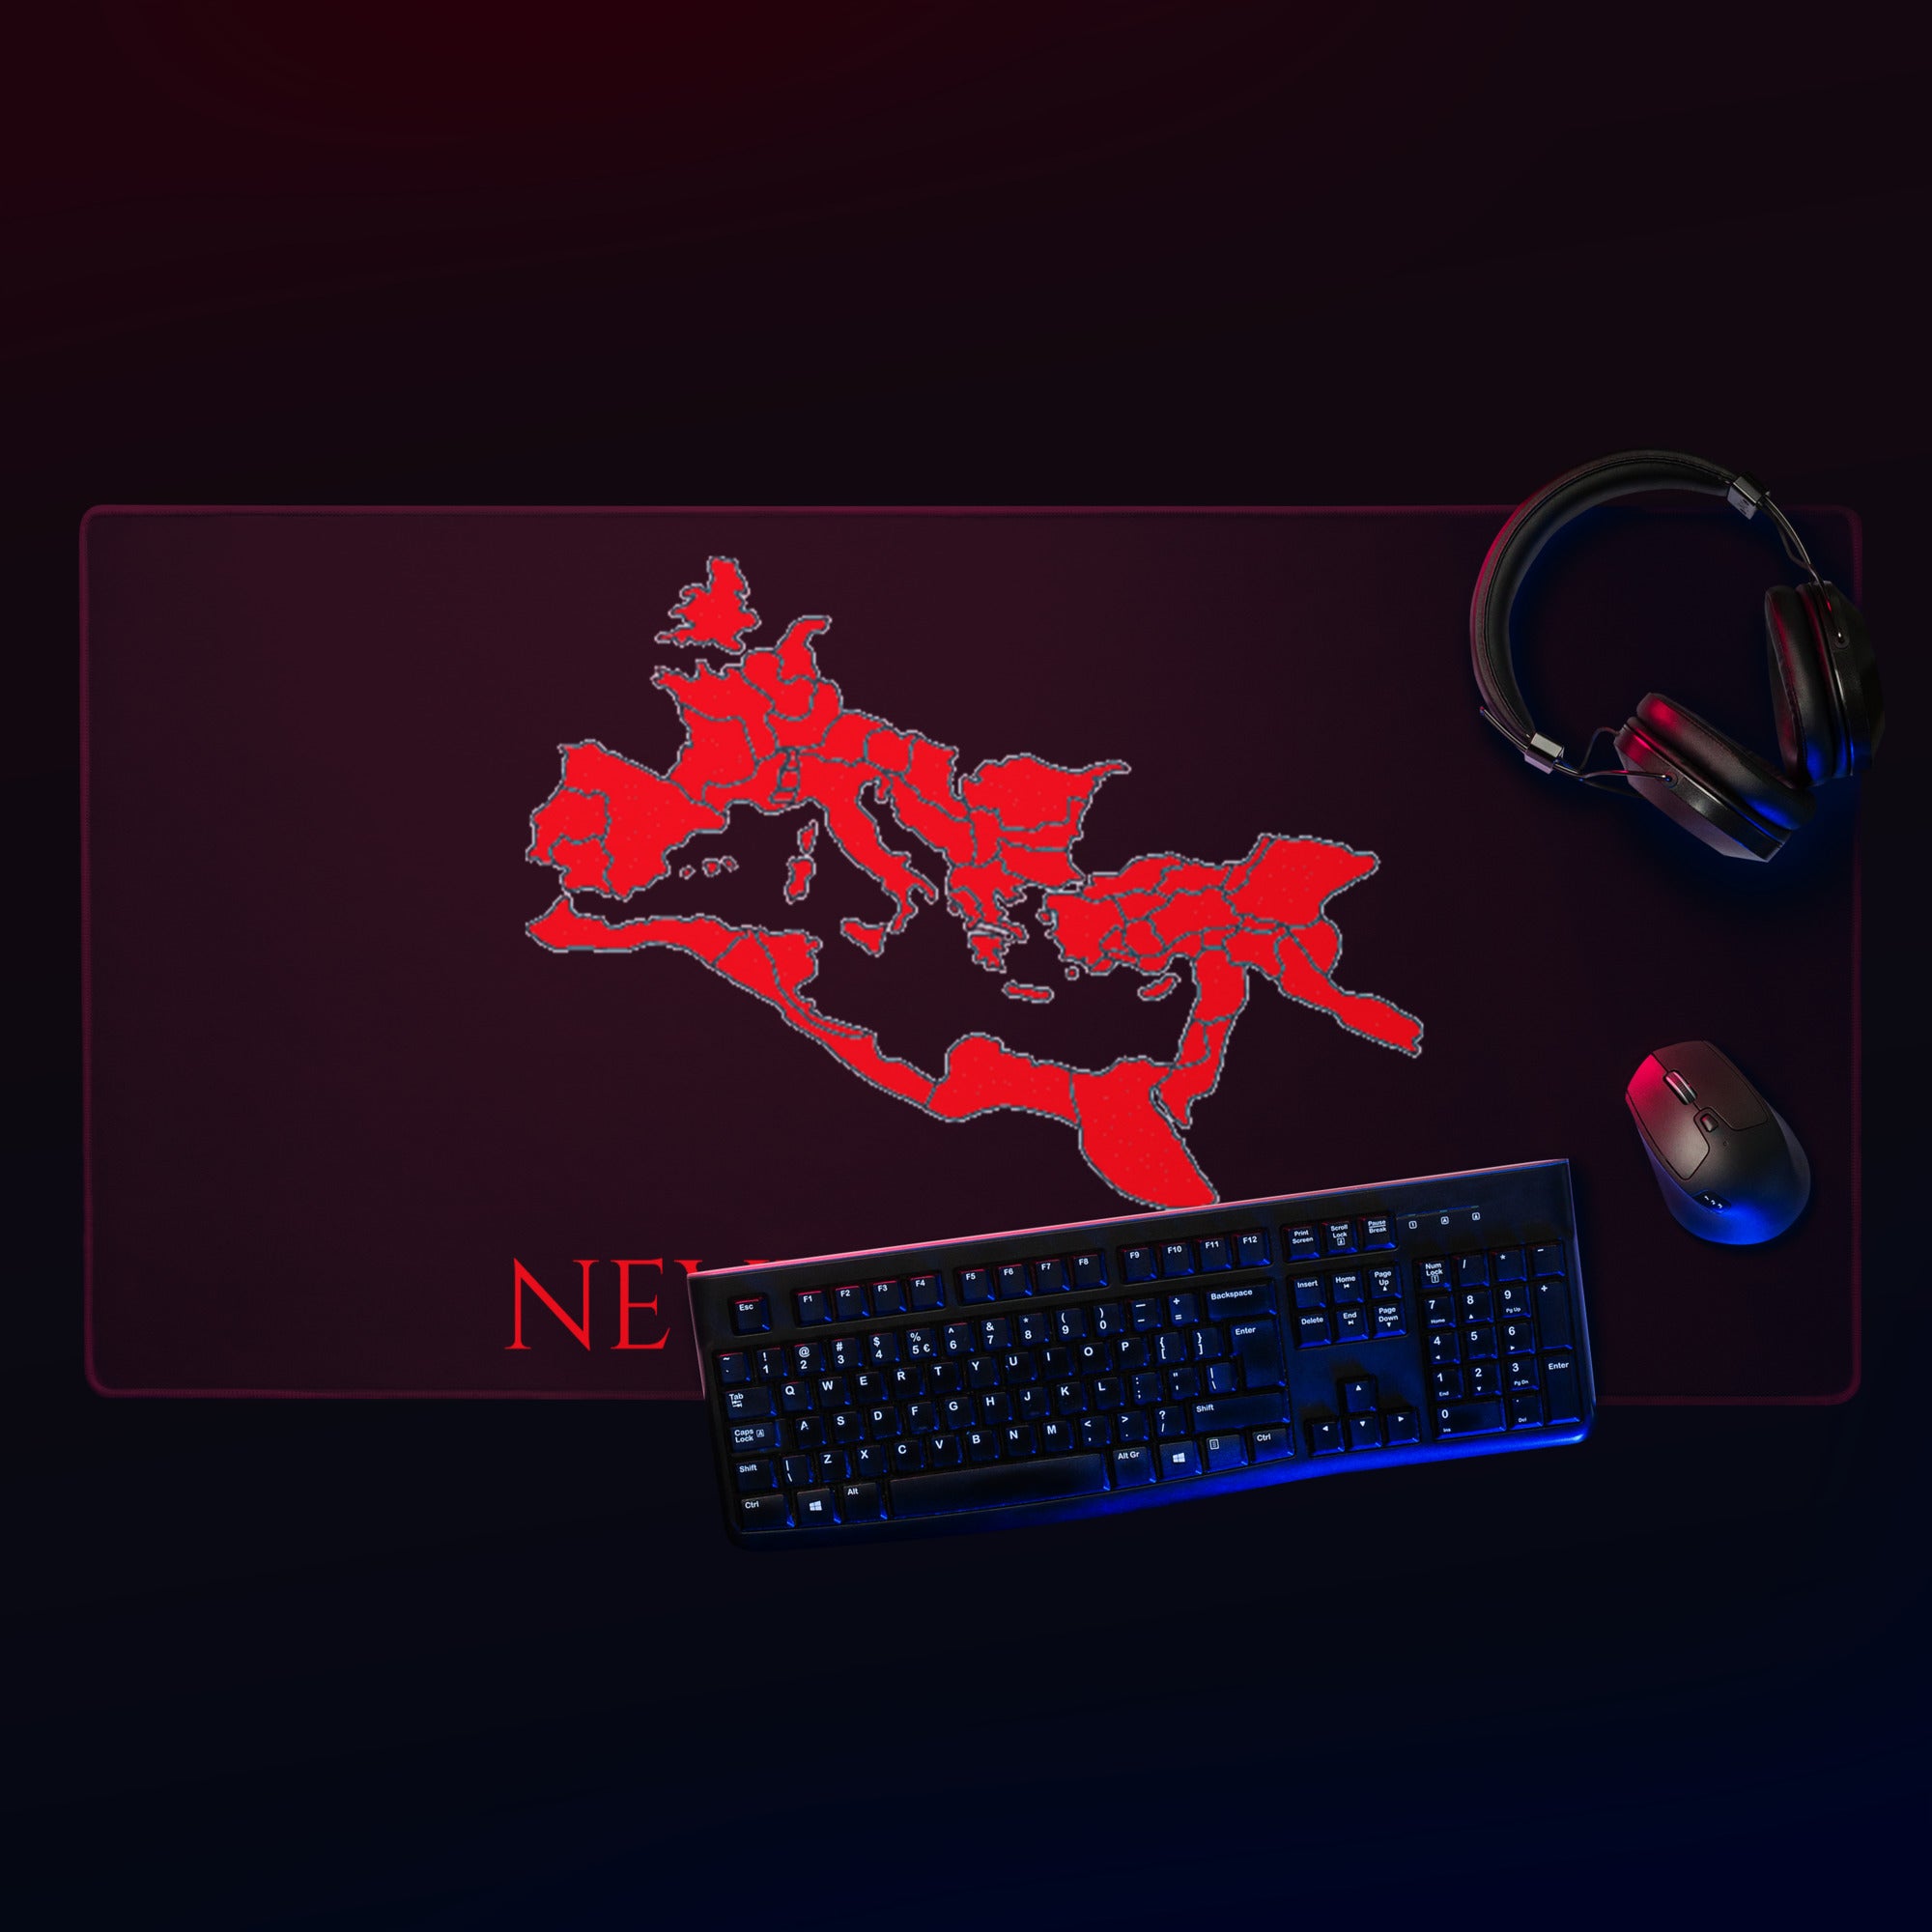 Roman Empire - Never Forget - Ancient Rome - Gaming Mouse Pad